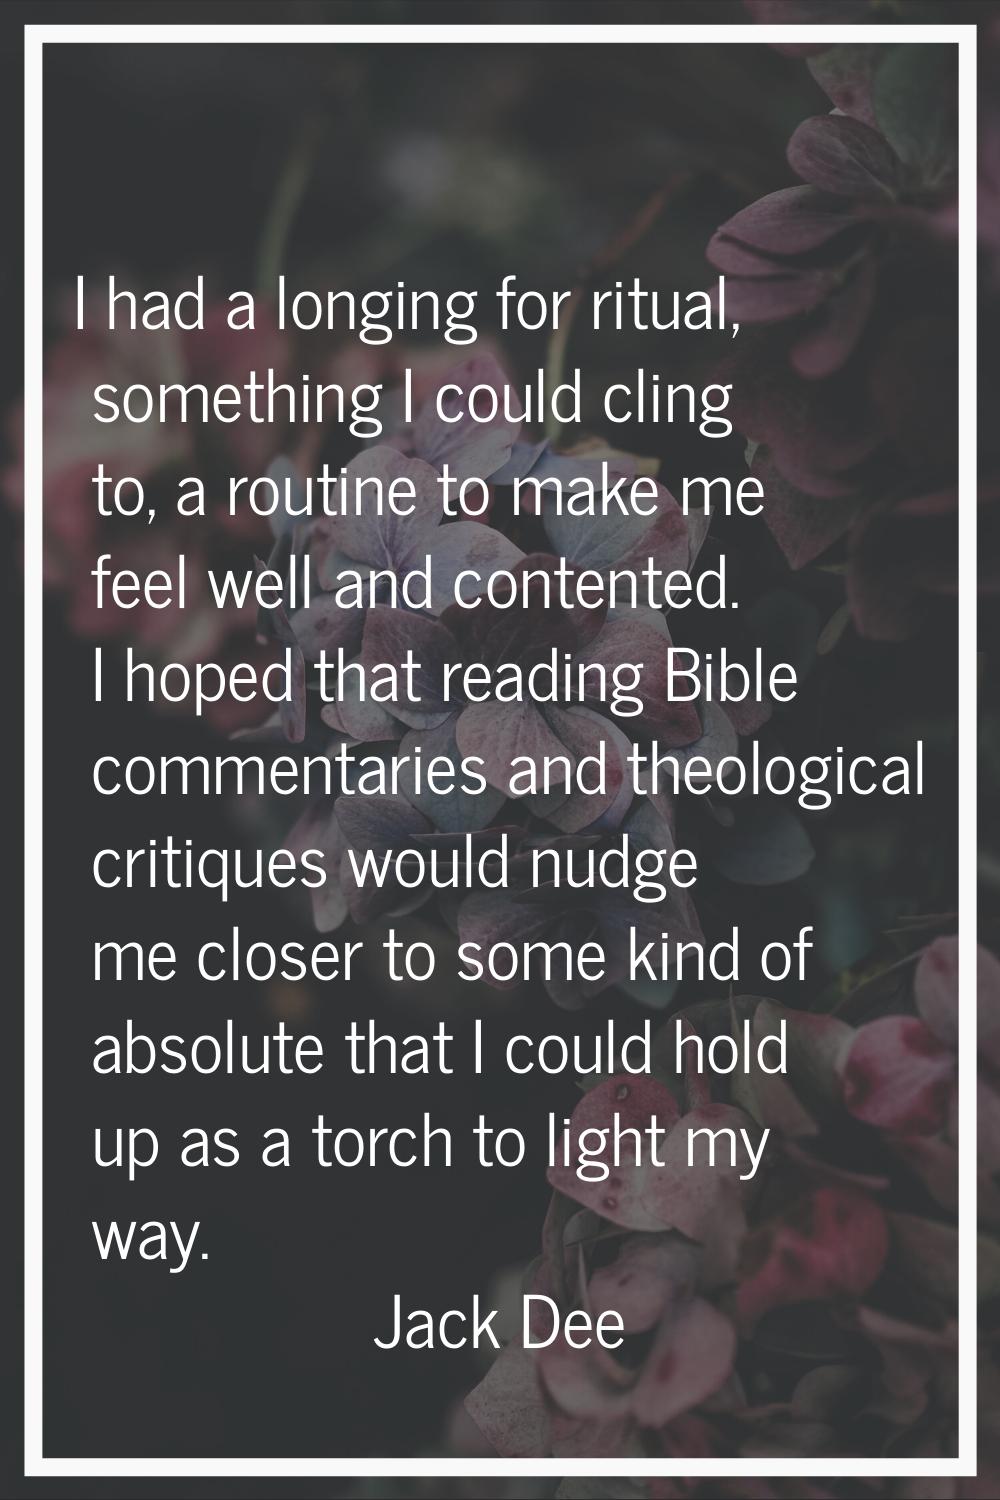 I had a longing for ritual, something I could cling to, a routine to make me feel well and contente